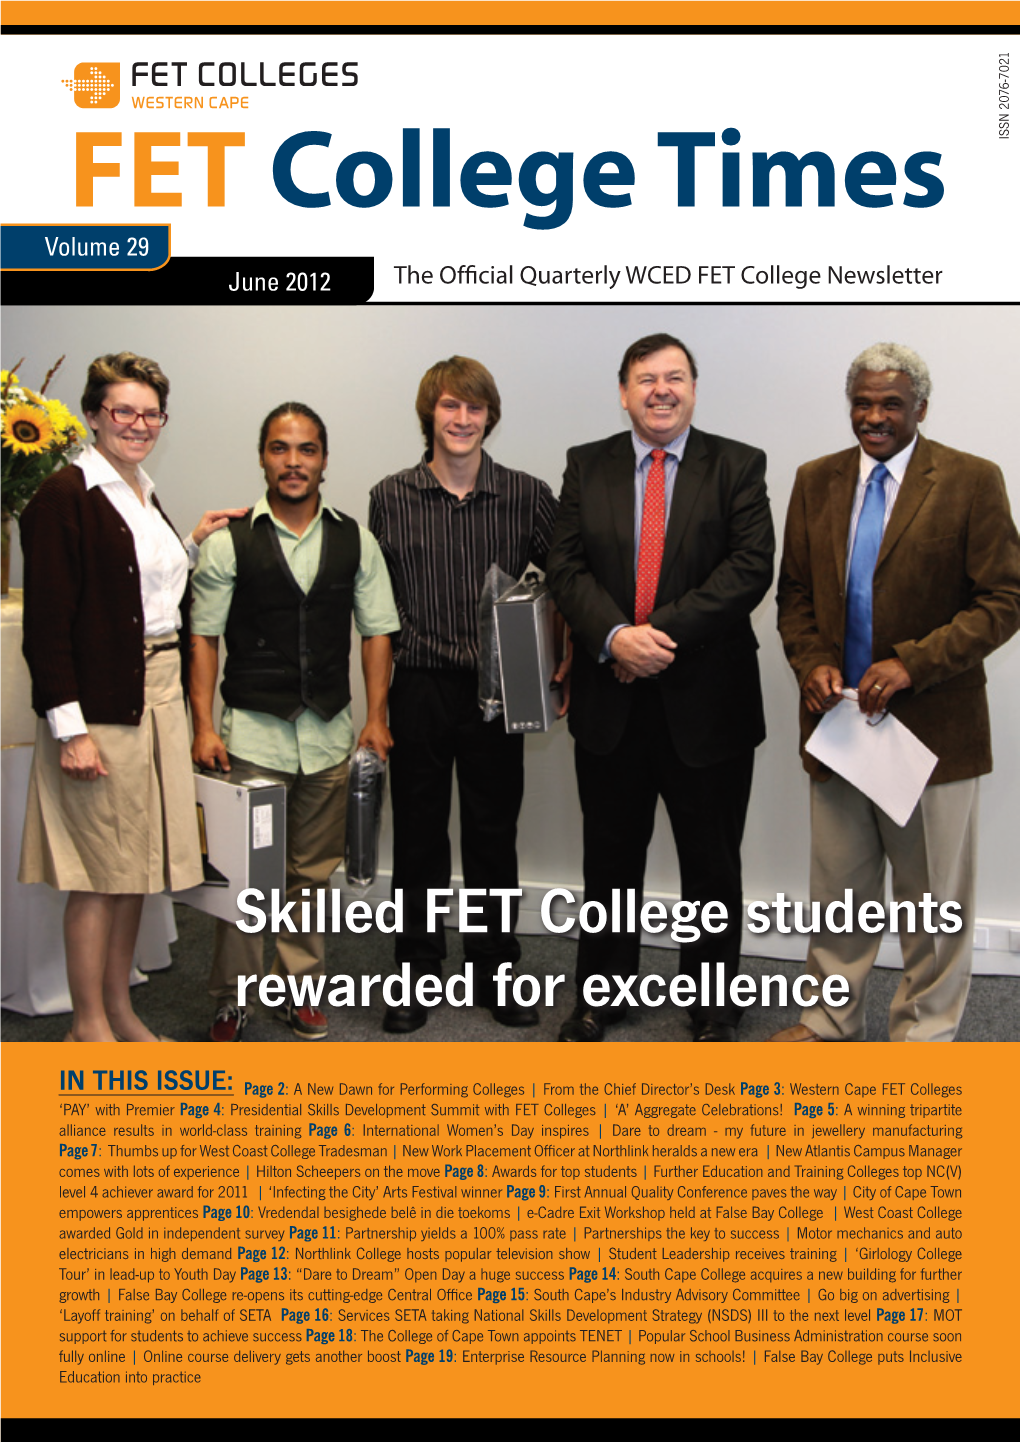 FET College Times ISSN 2076-7021 Volume 29 June 2012 the Official Quarterly WCED FET College Newsletter